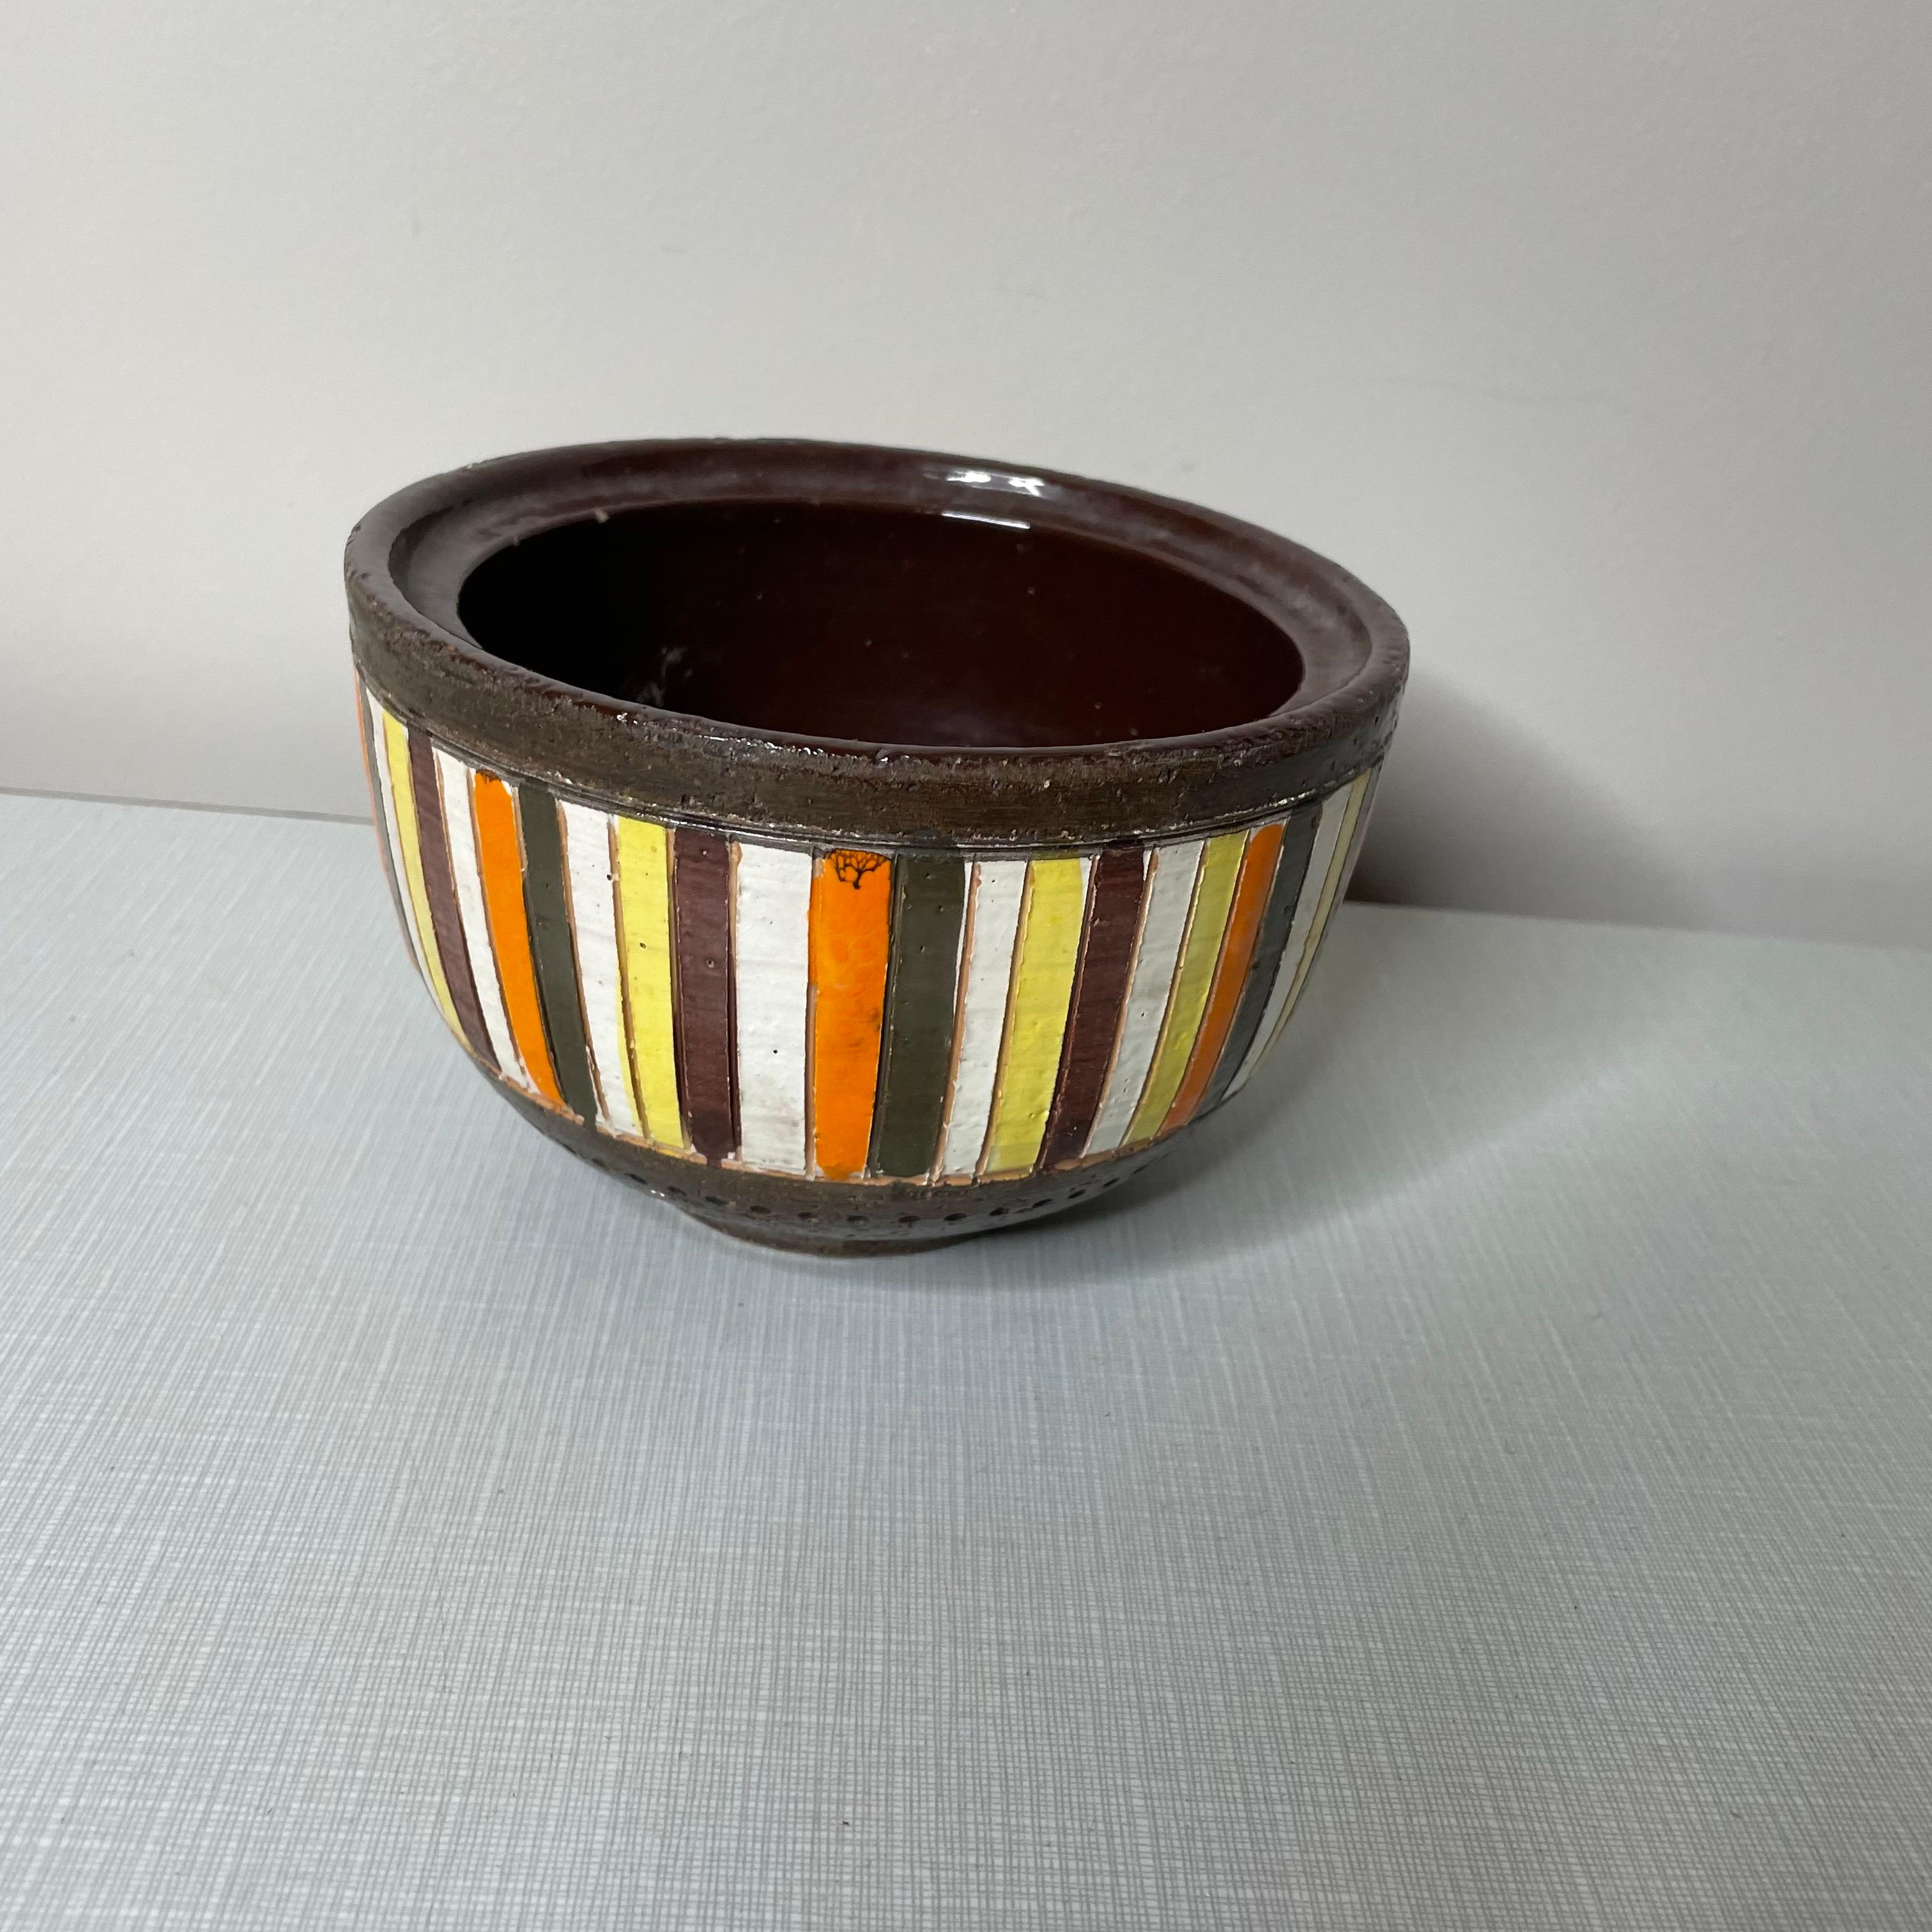 Italian made candy bowl by Rosenthal Netter, likely by Bitossi Raymor. Some minor chips in a few spots. Please look over the photos for a better idea of the light wear. Signed on base.